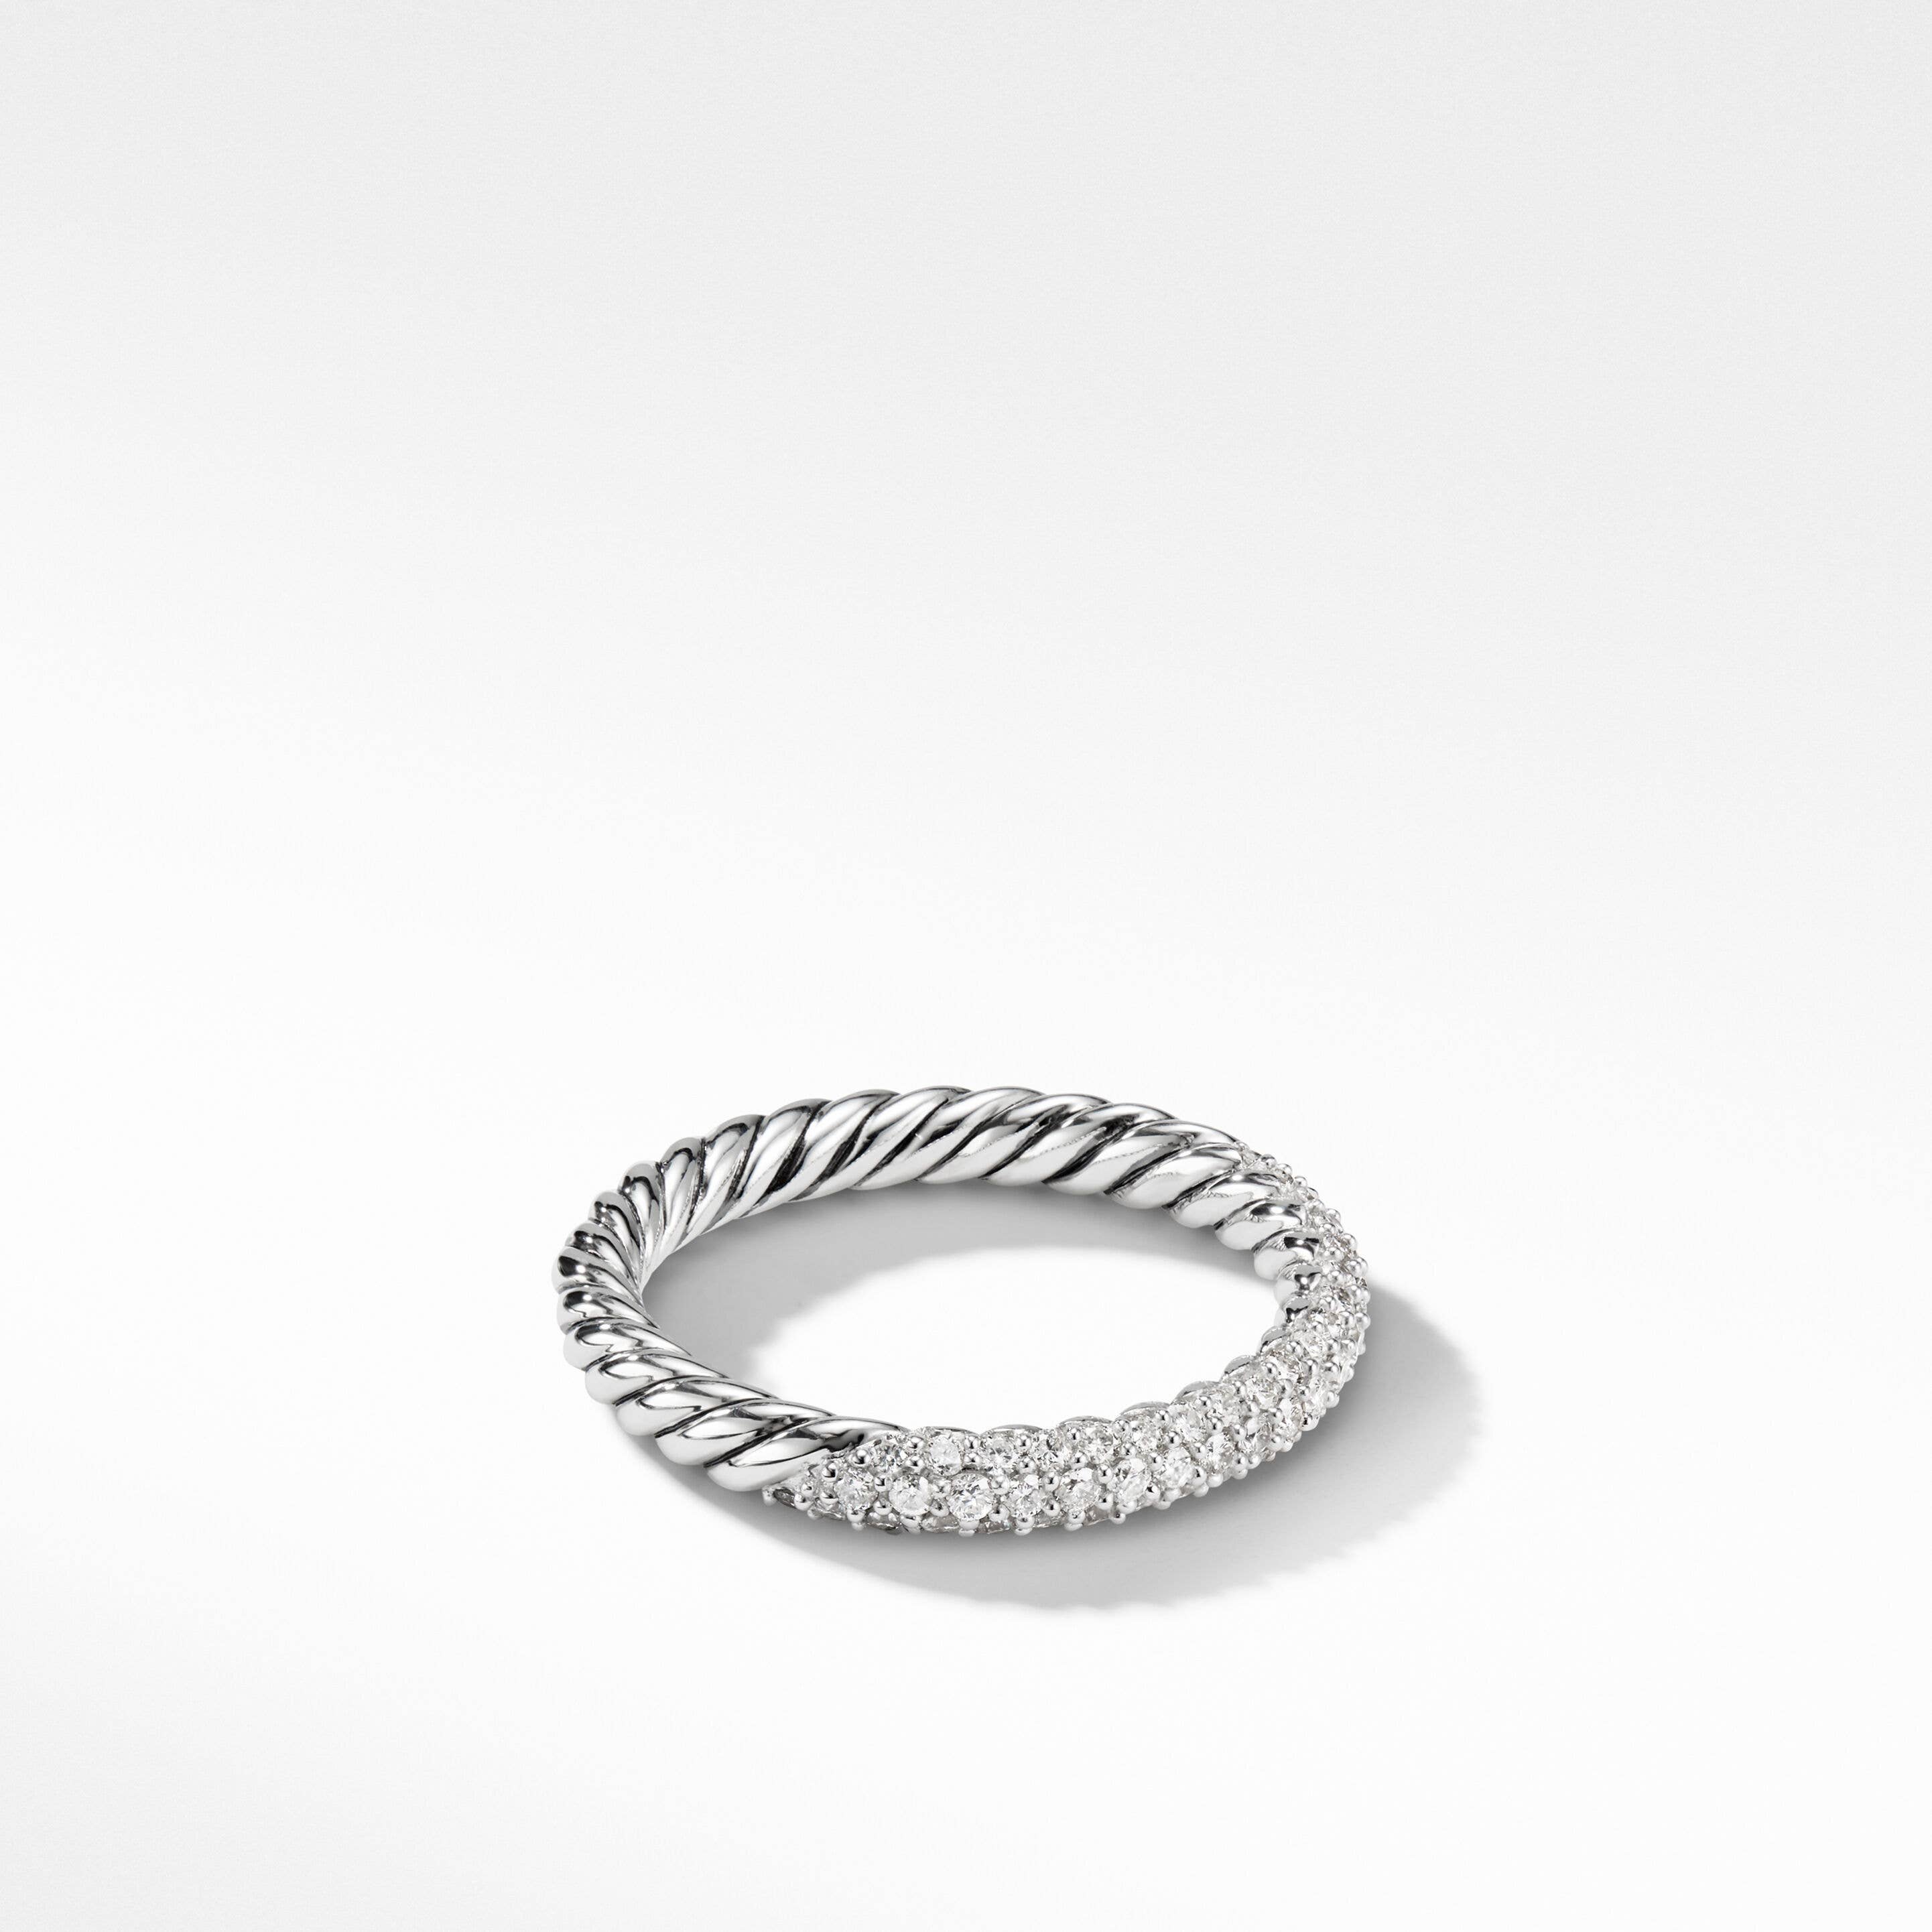 Petite Pavé Stack Ring in Sterling Silver with Diamonds